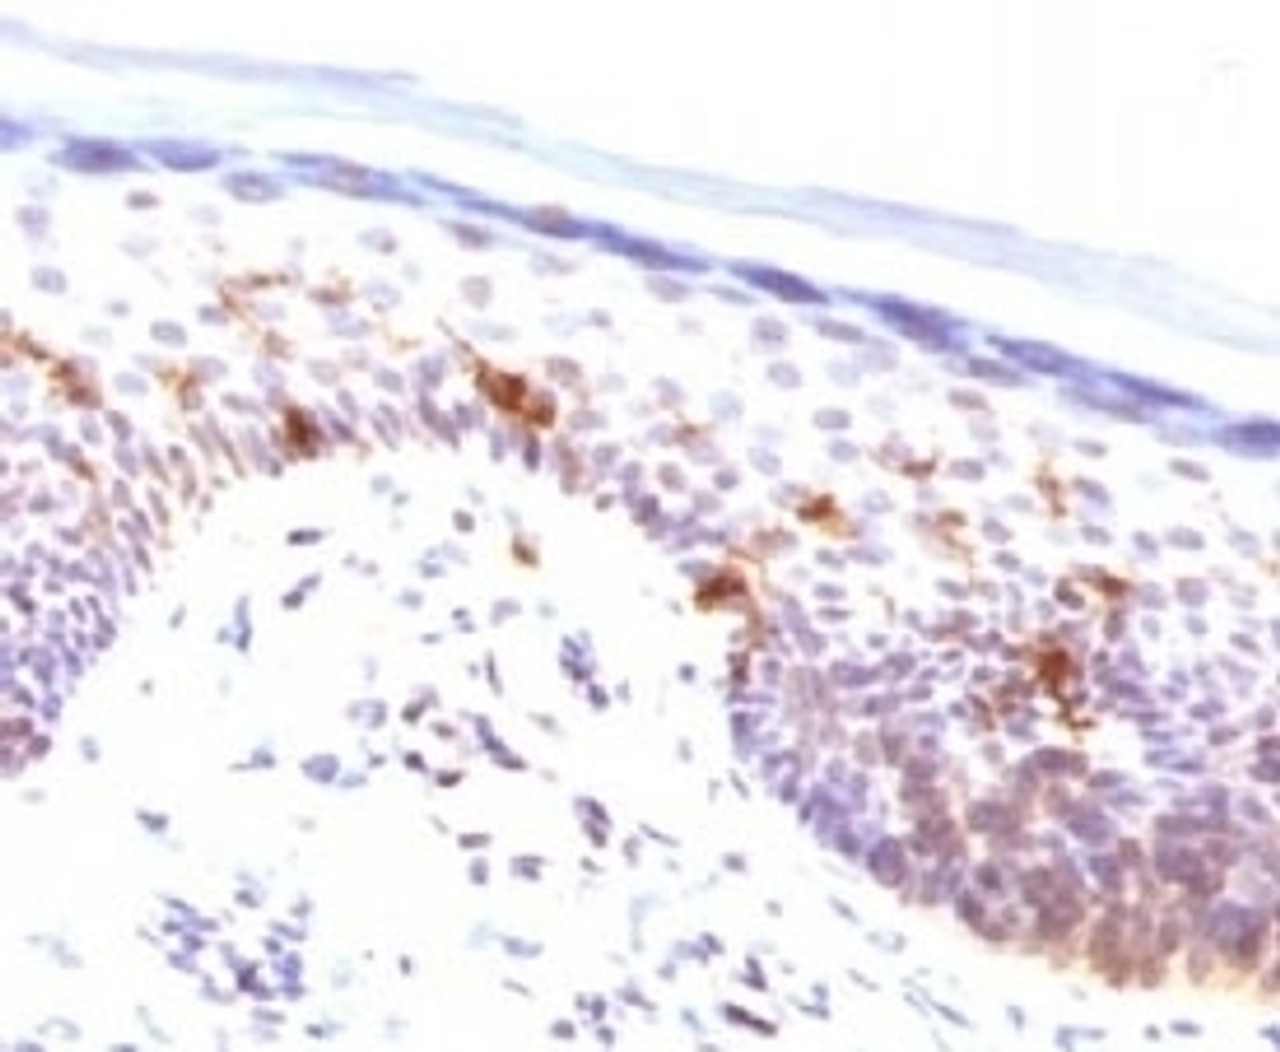 IHC testing of human human skin stained with CD1a antibody (CLDA1a) .